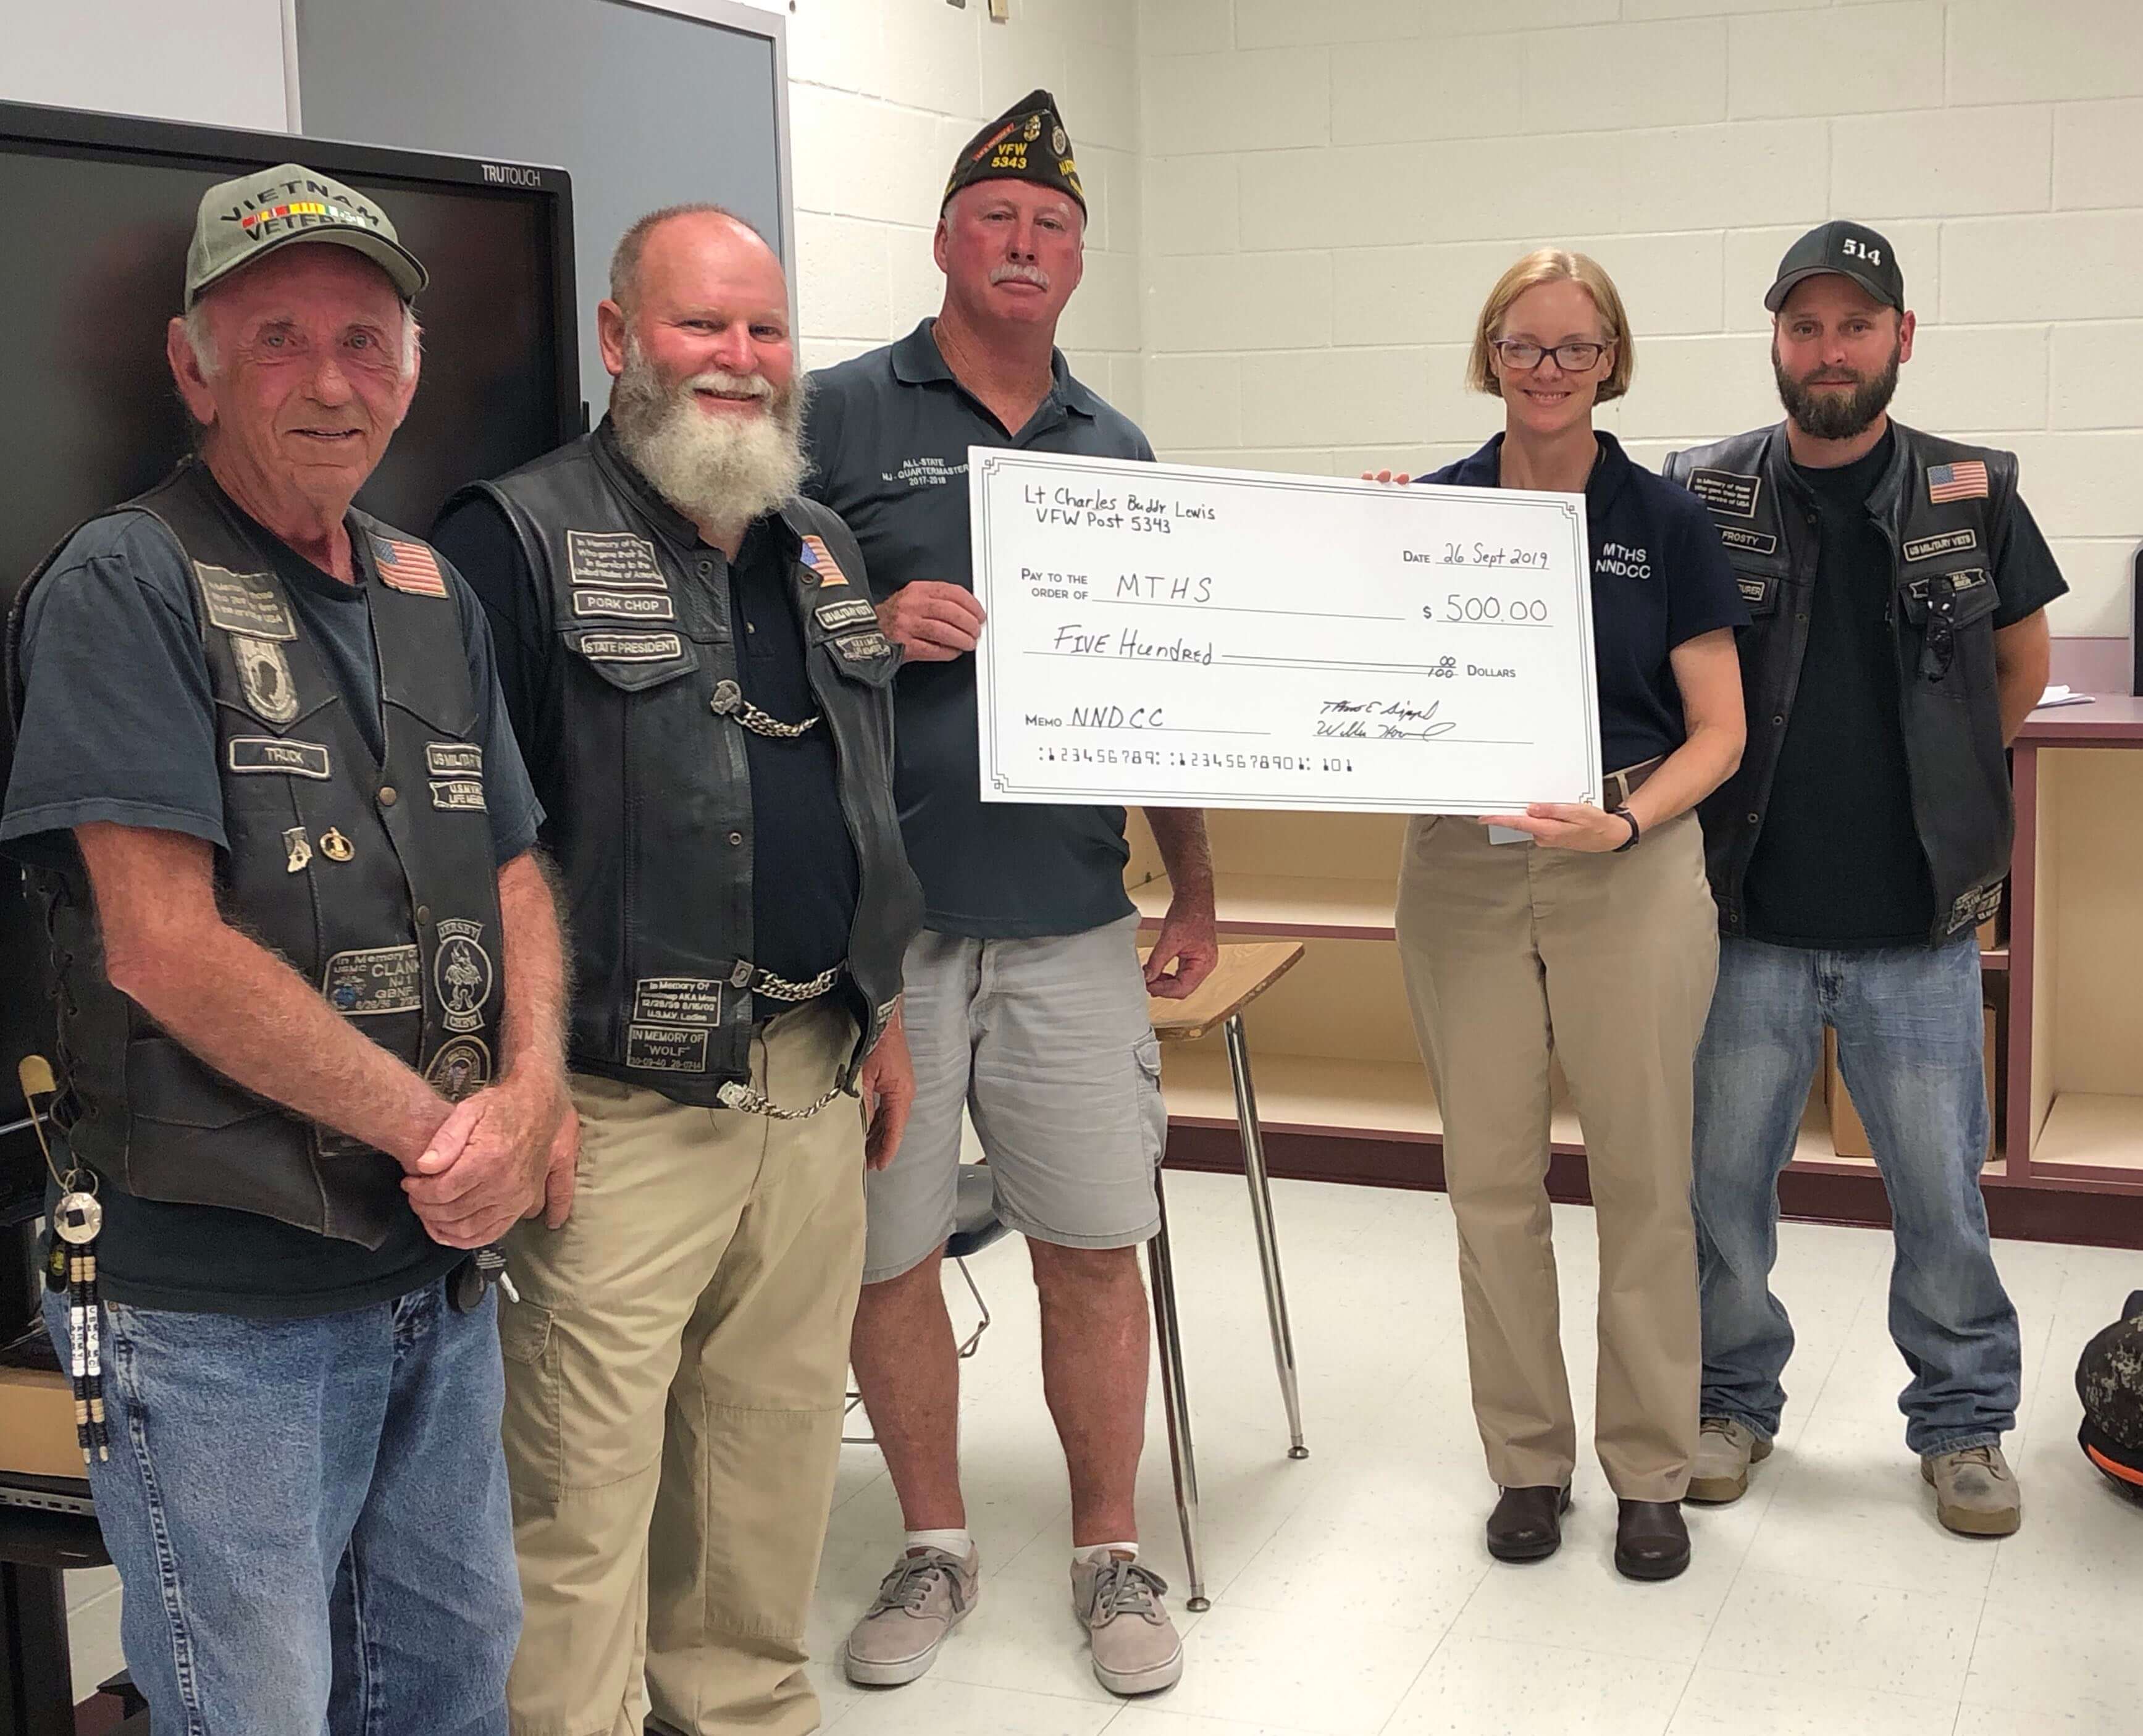 Representatives from Villas VFW Post 5343 present a $500 donation check to Commander Blood and students. Pictured left to right: Joseph Kremp